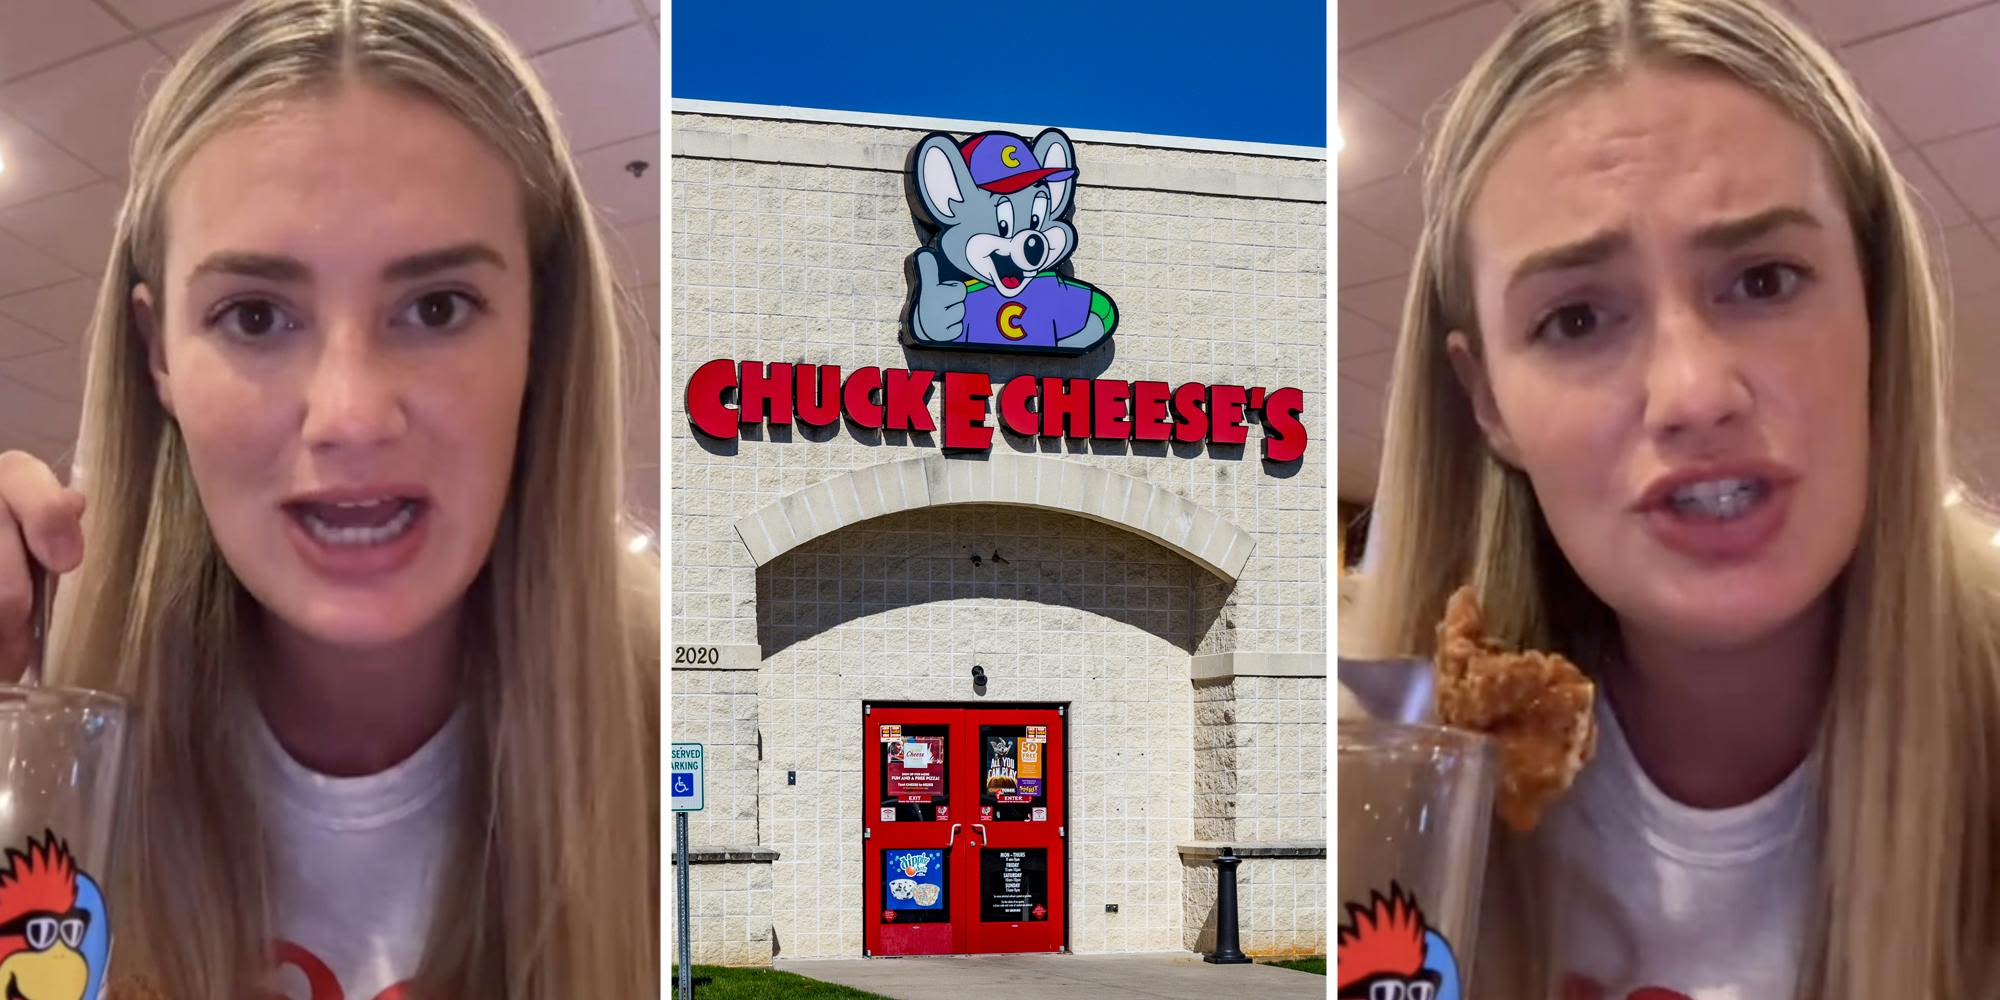 ‘Can someone tell me if I tipped my Chuck E. Cheese waitress inadequately?’: Mom says Chuck E. Cheese waitress asked for tip via Cash App. Is this normal?